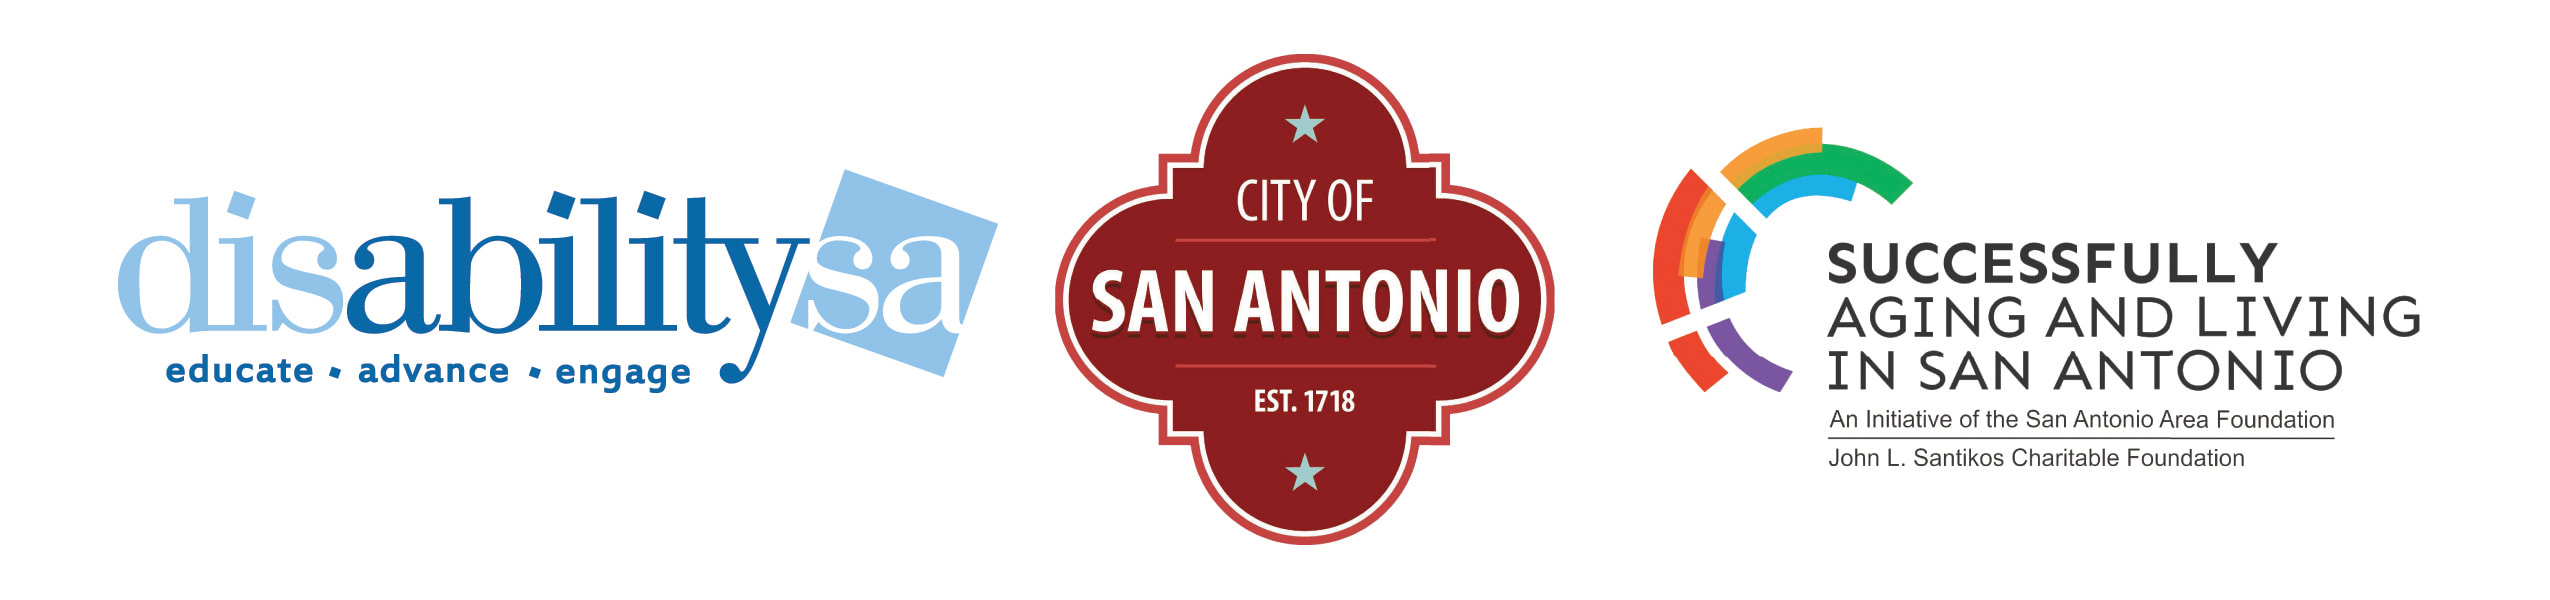 disability s a , city of san antonio, and successfully aging and living in san antonio logos